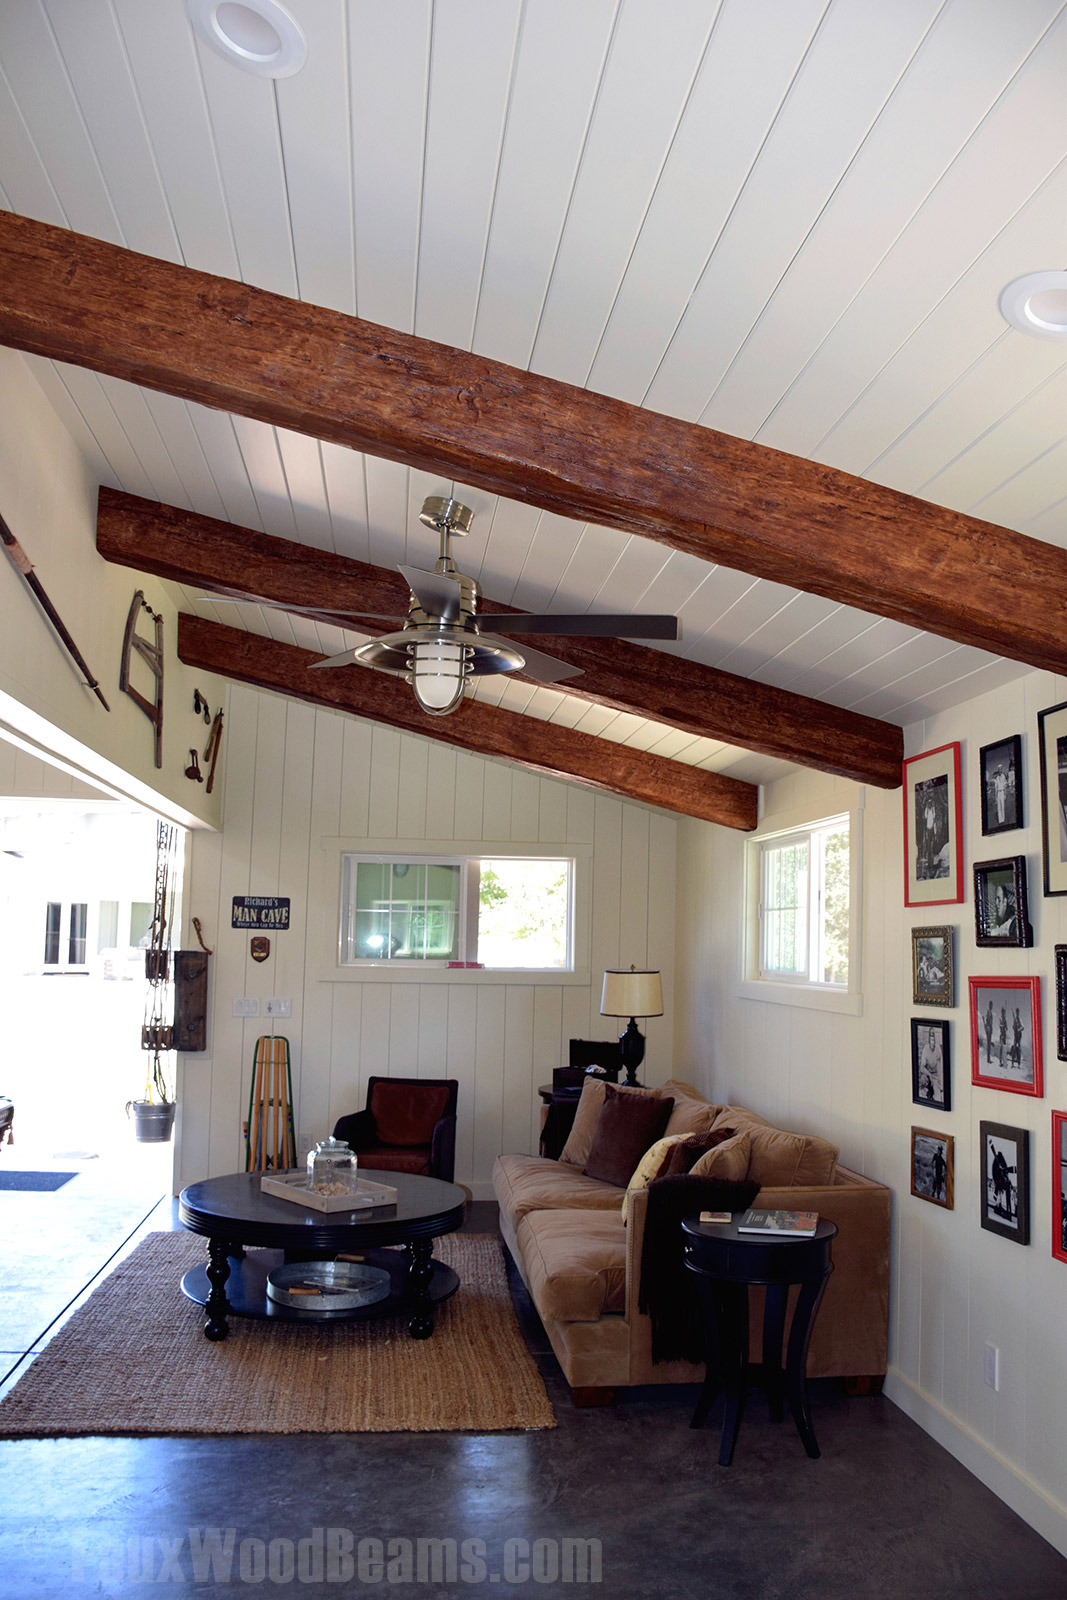 Use Exposed Beams or Wood Paneling